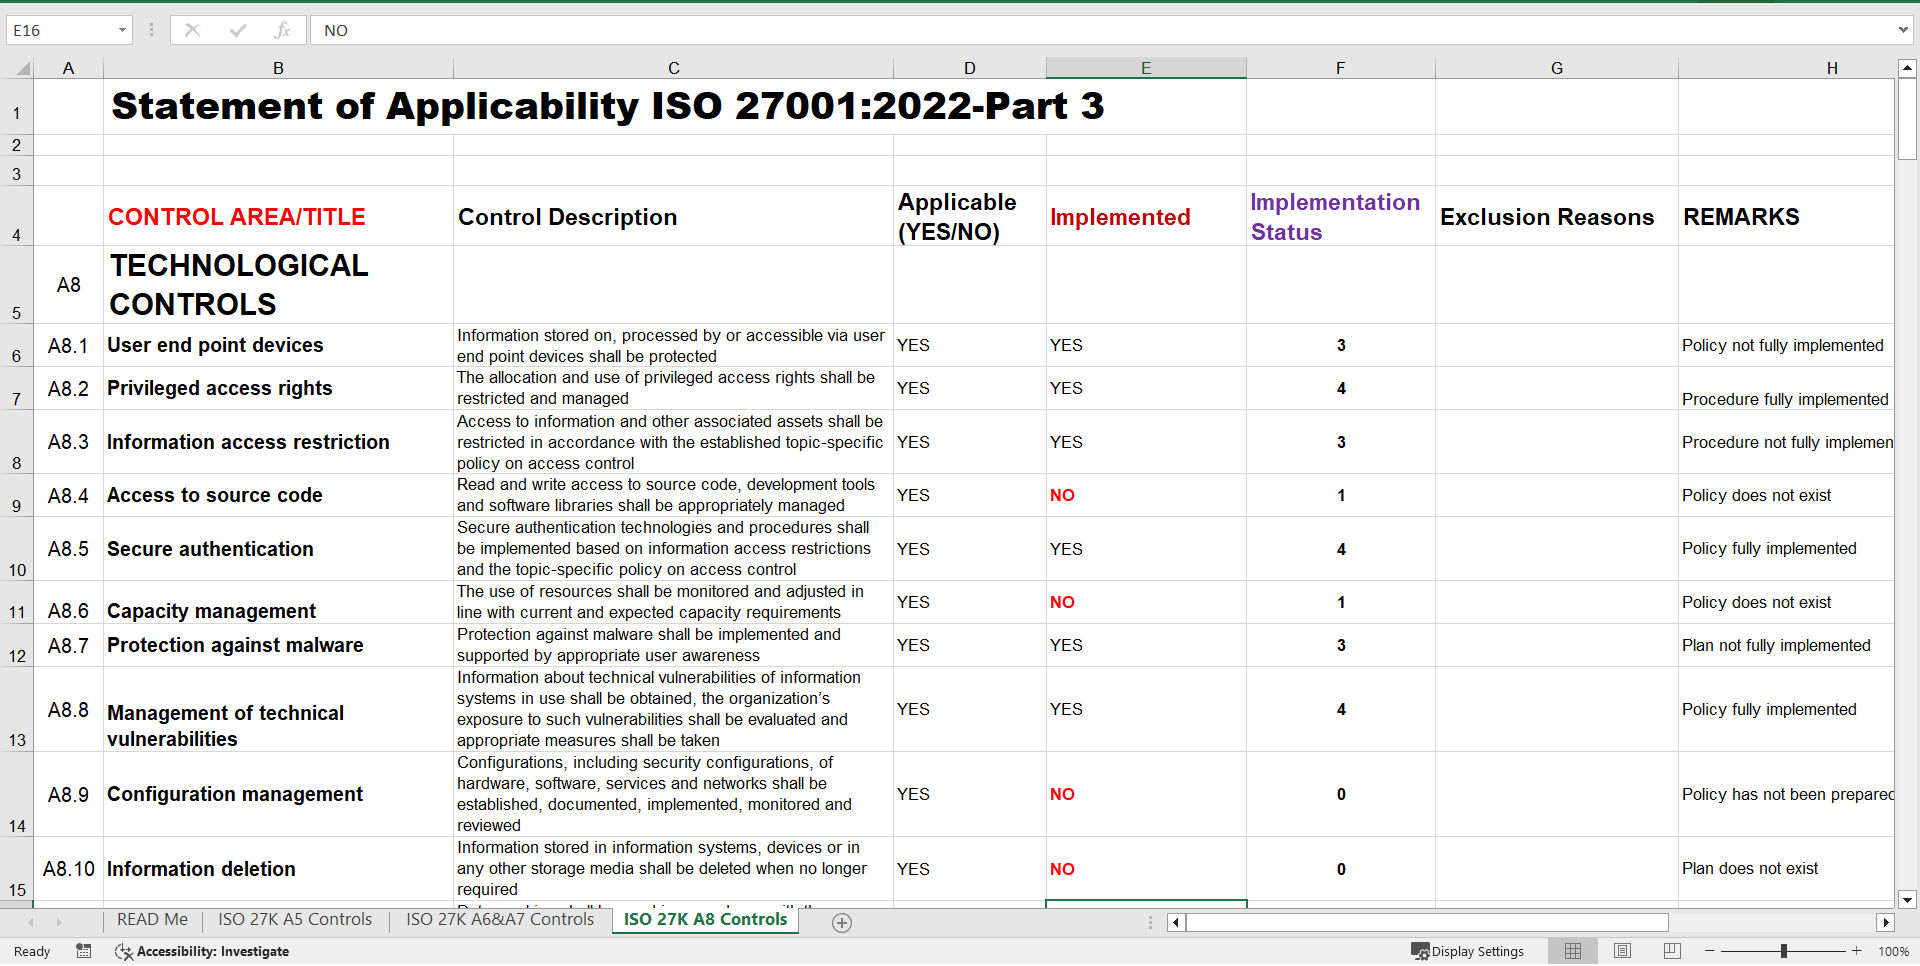 ISO 27001/2-2022 Version - Statement of Applicability (Excel template (XLSX)) Preview Image